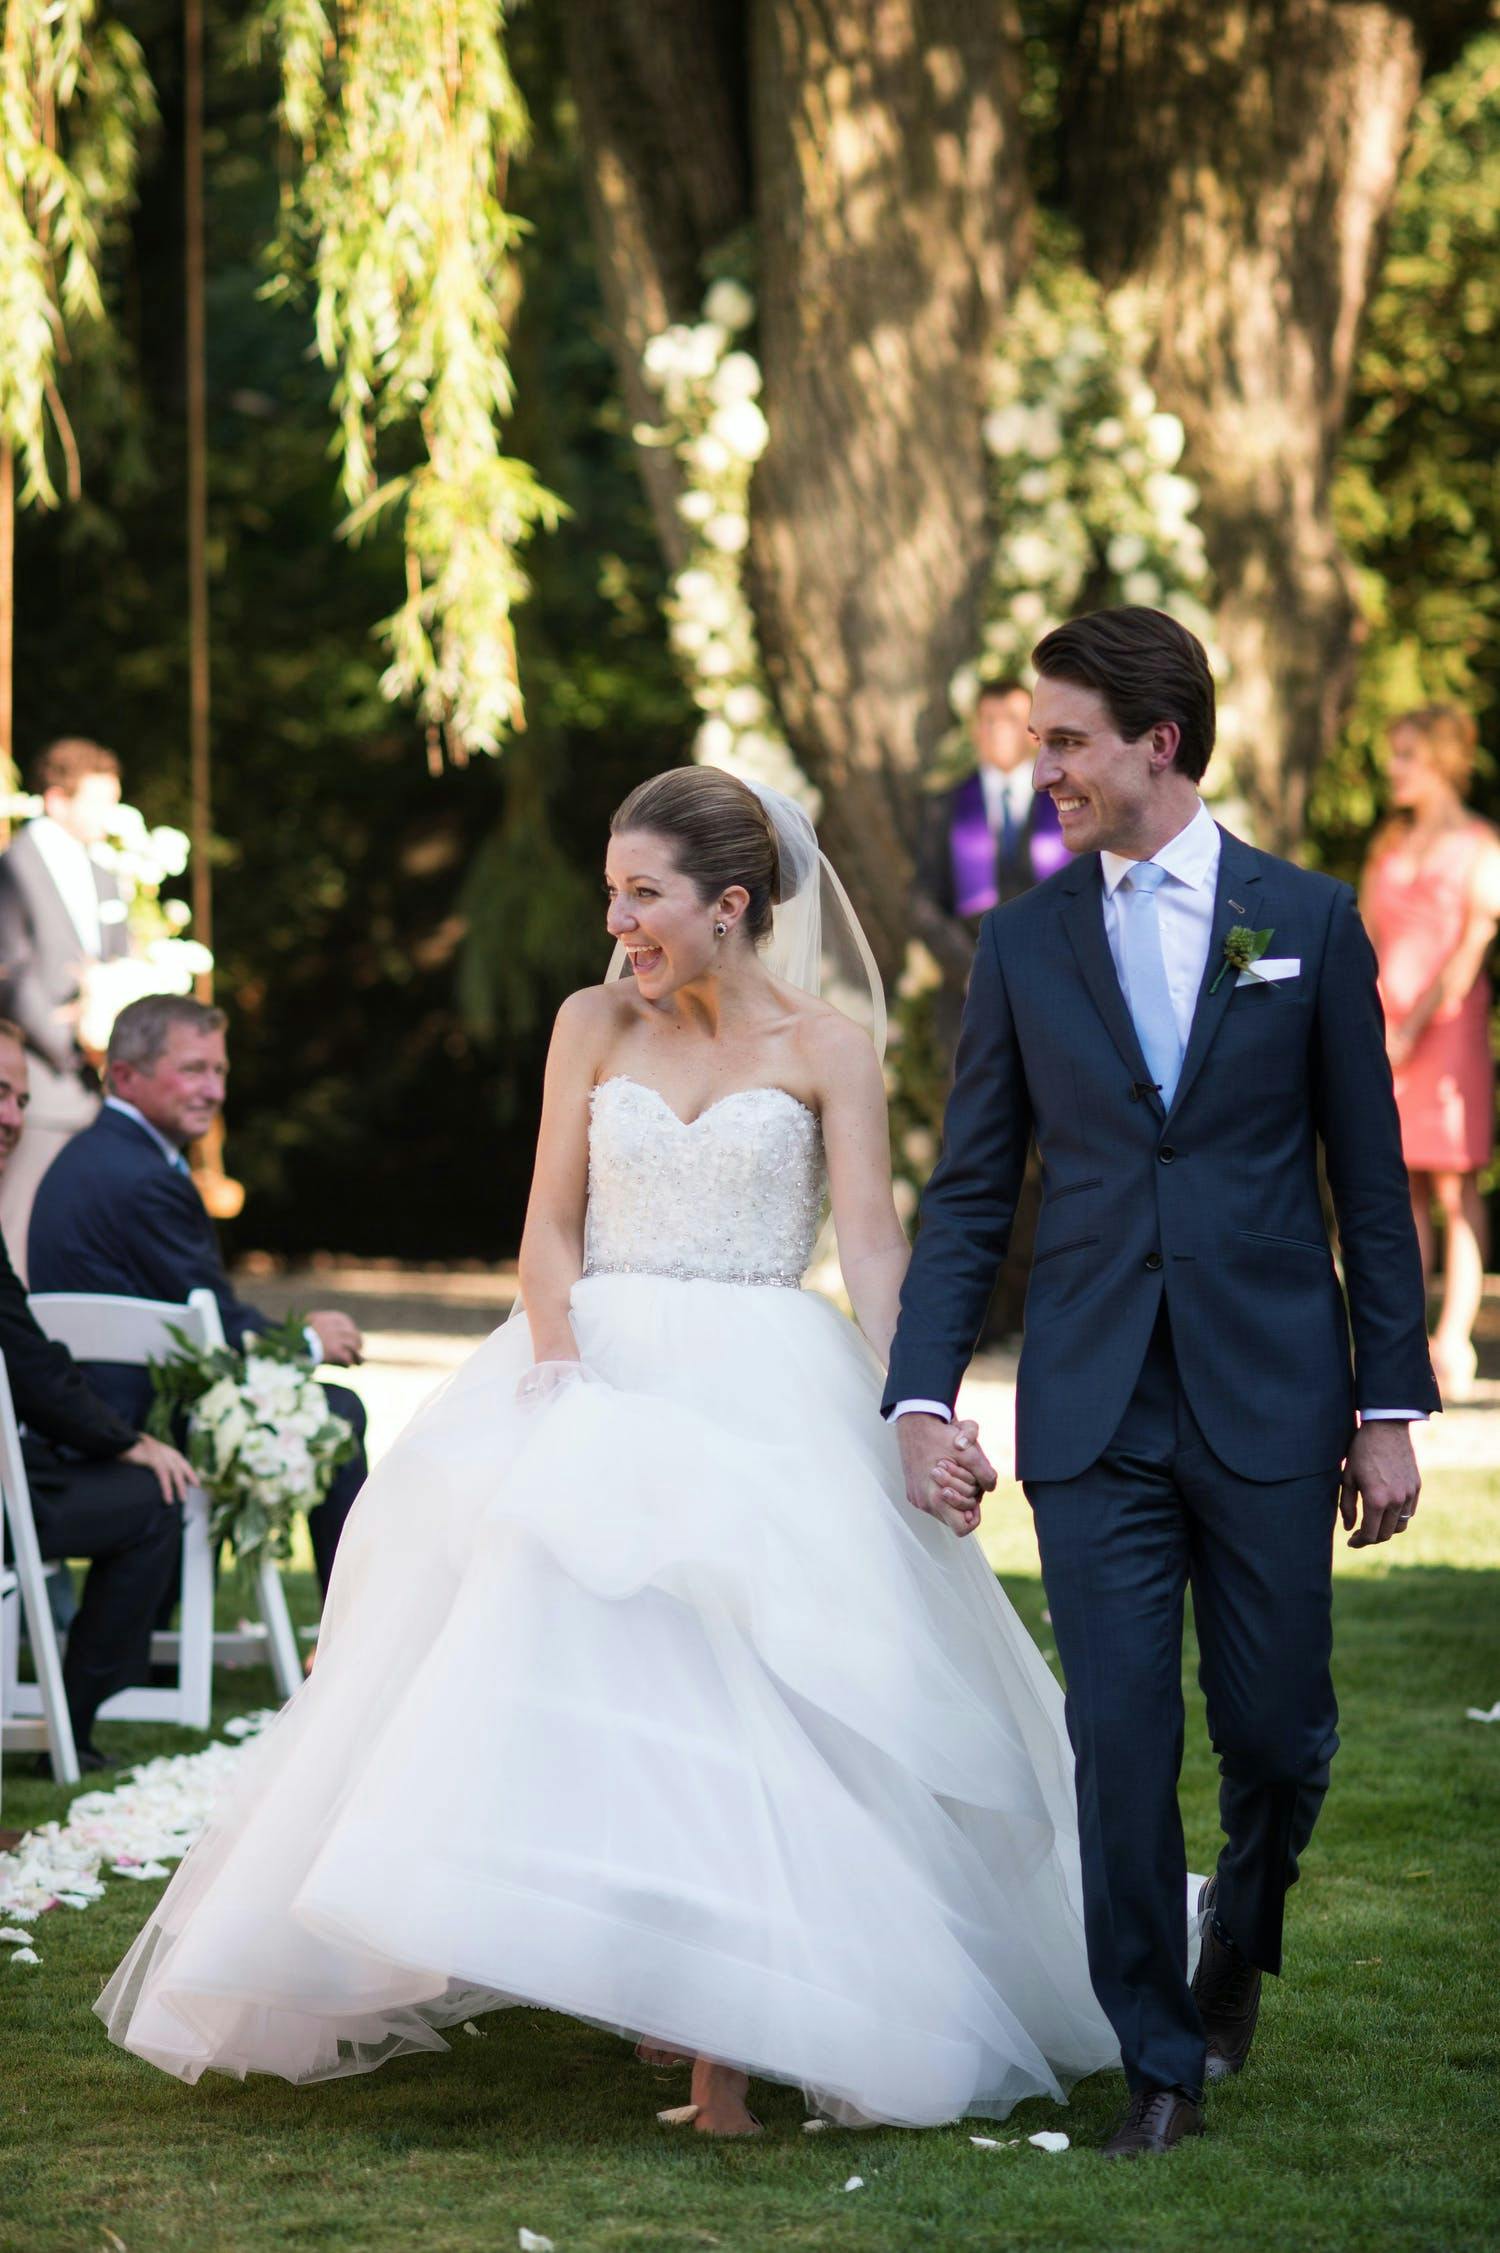 Wedding Recessional at Private Home in Chicago Suburbs Planned by SQN Events | PartySlate